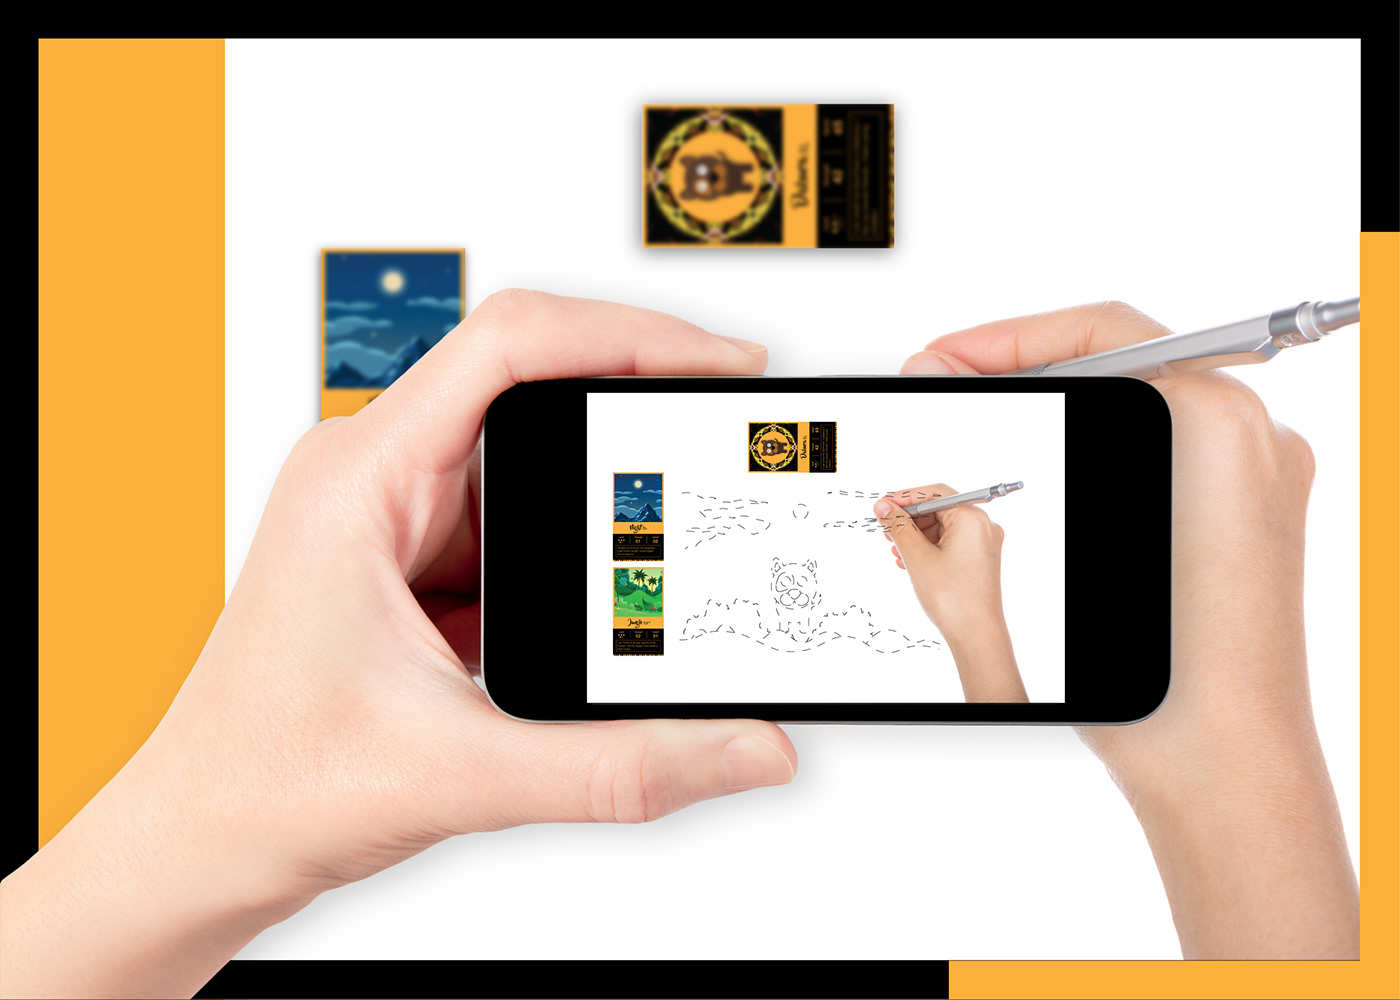 augmented reality AR Interaction design  Drawing  immersive Interface Experience adobeawards